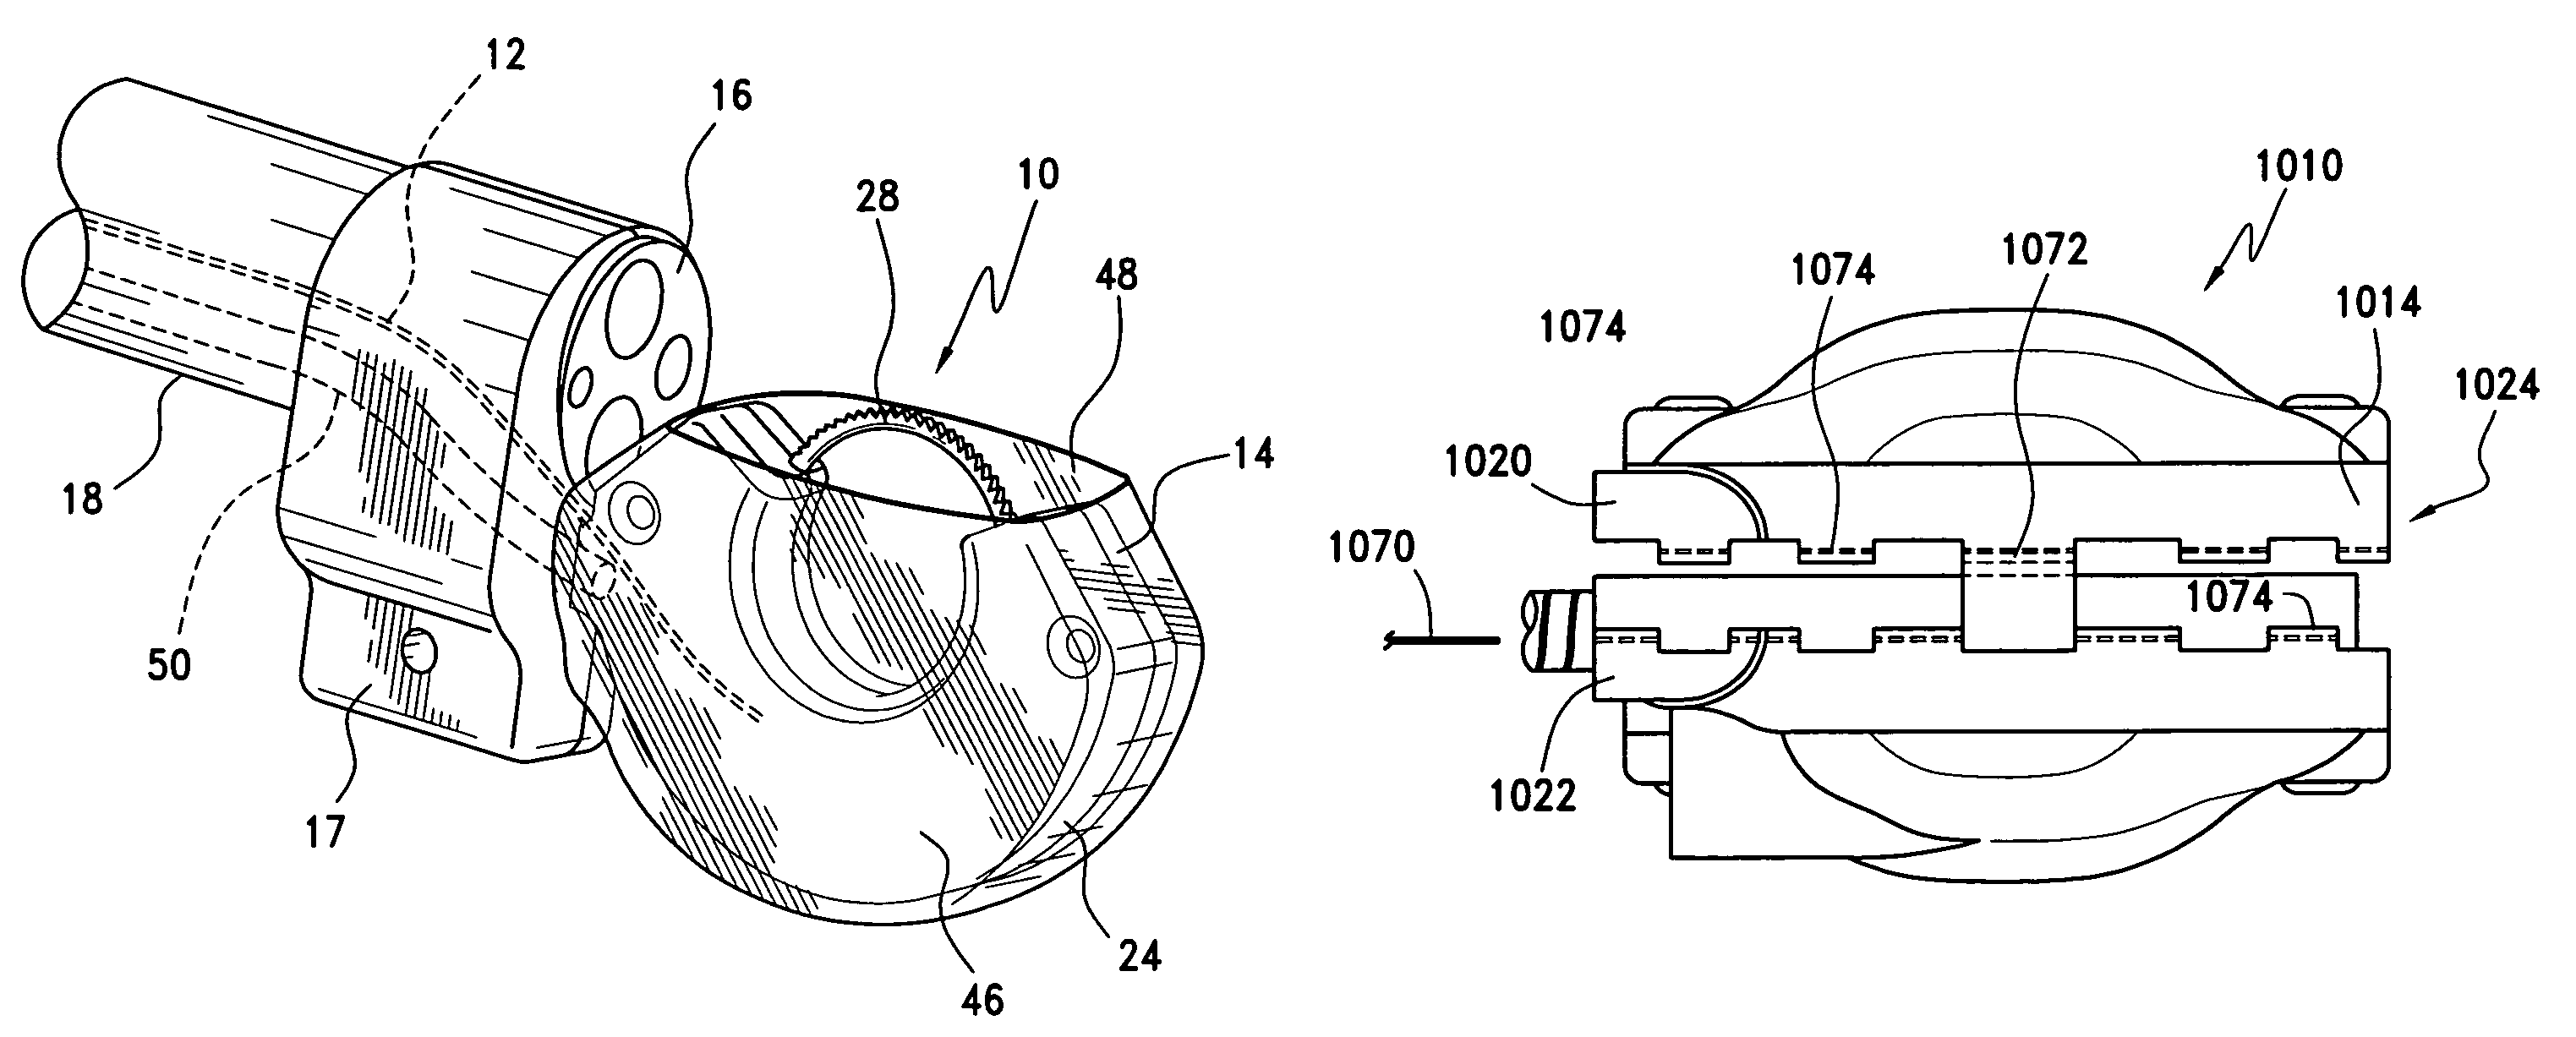 Surgical suturing apparatus with needle release system